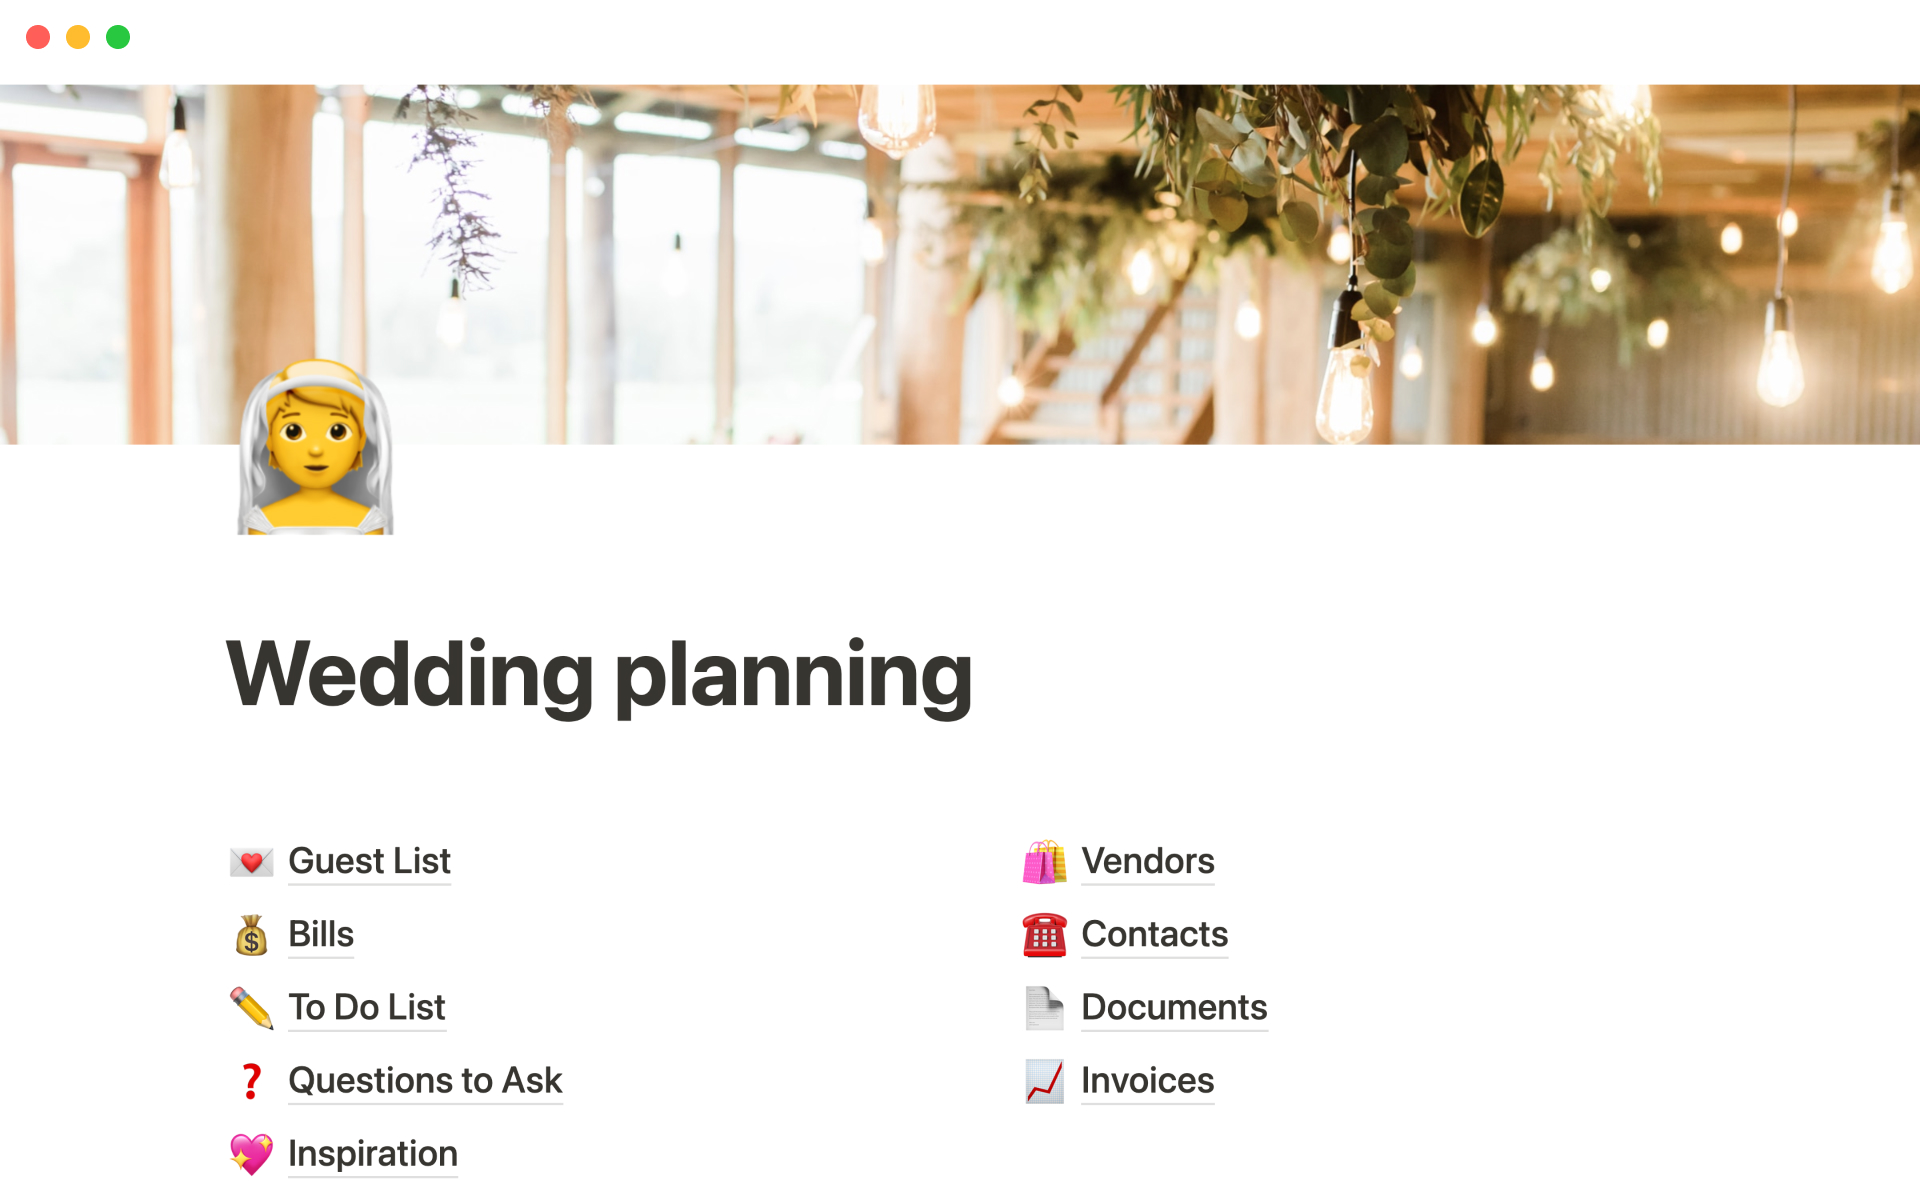 The desktop image for the Wedding planning template